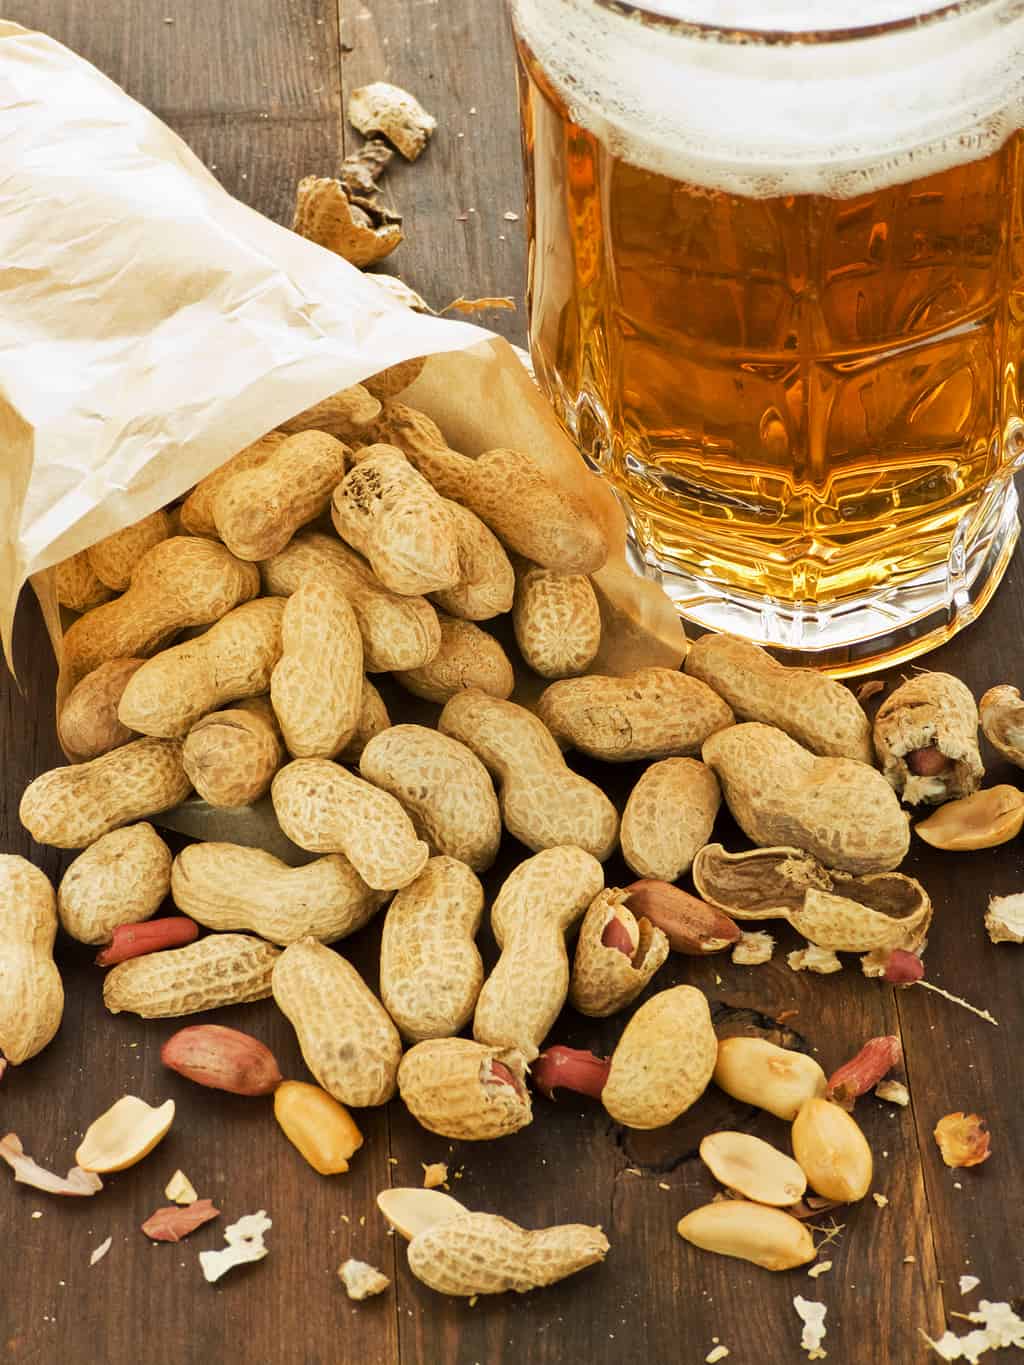 What happens after you drink and eat peanuts will shock you...